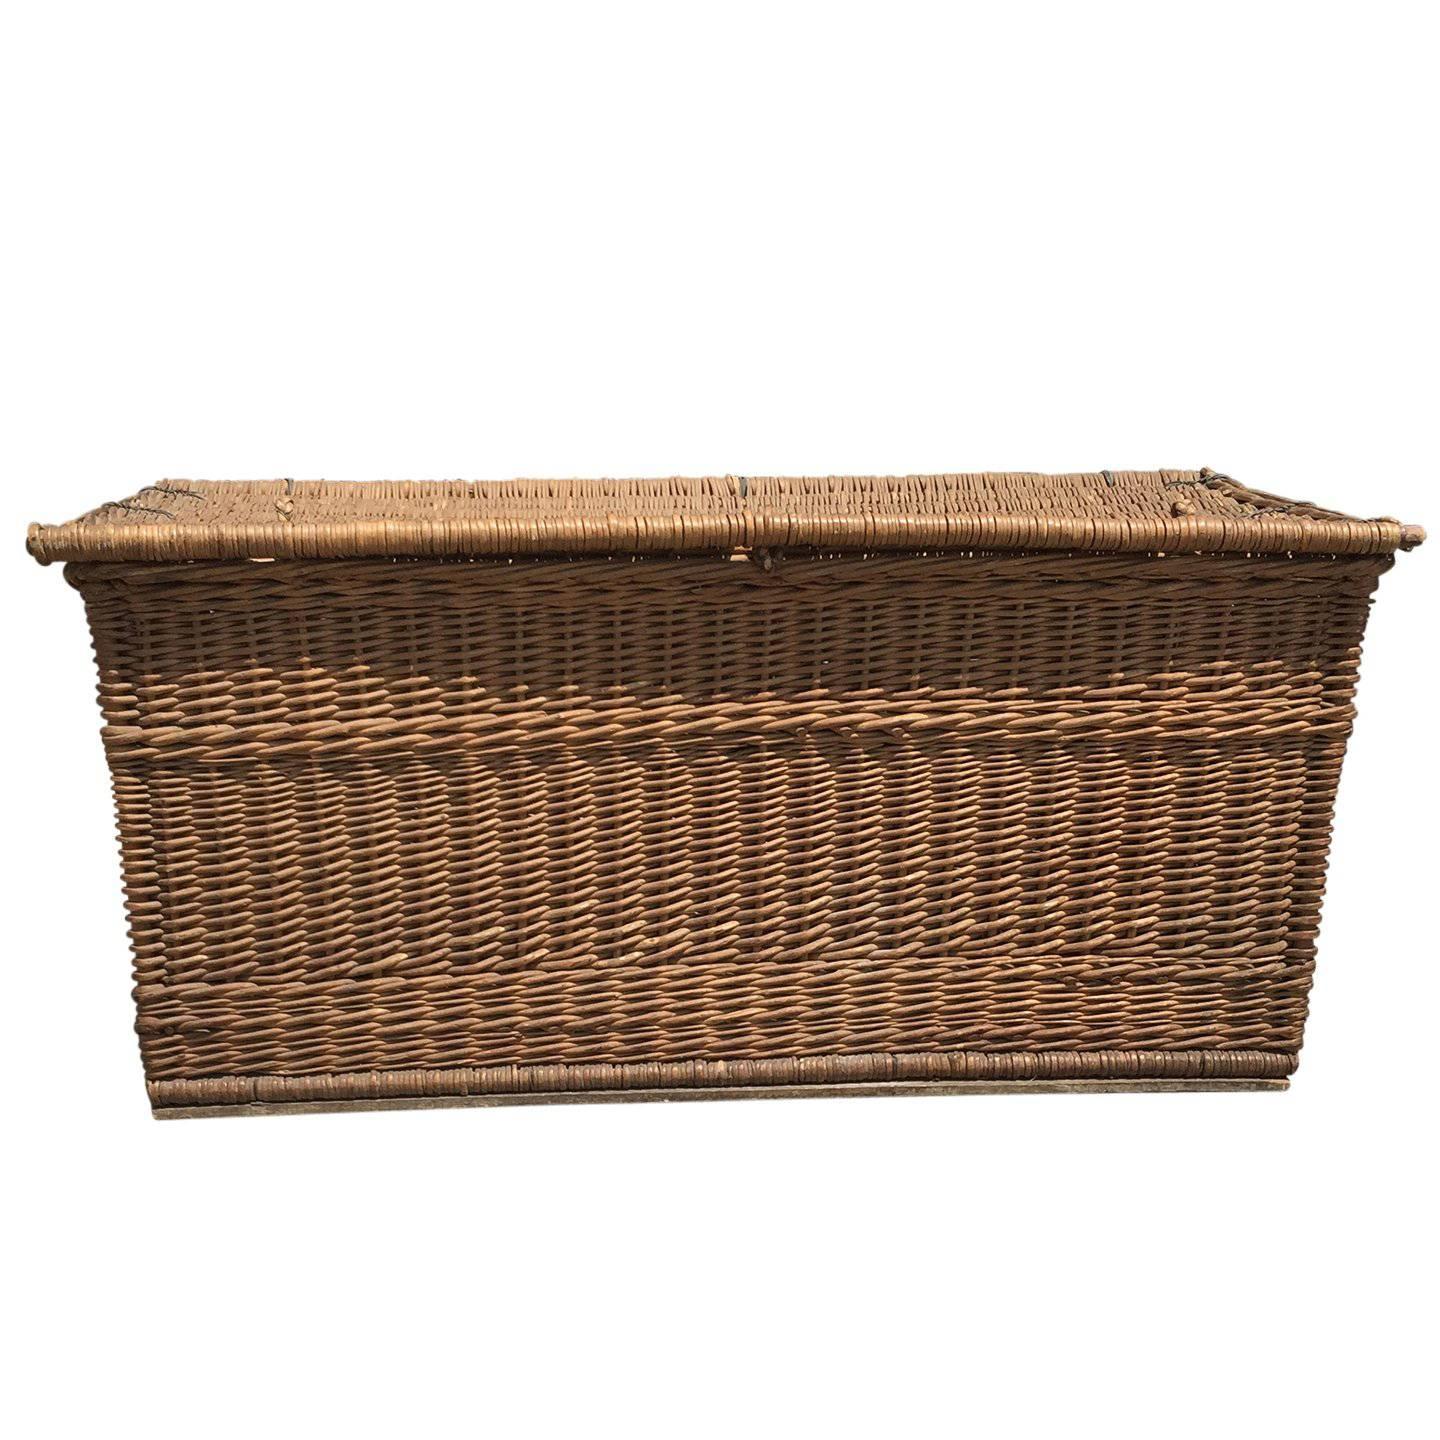 Early 20th Century Large Wicker Trunk